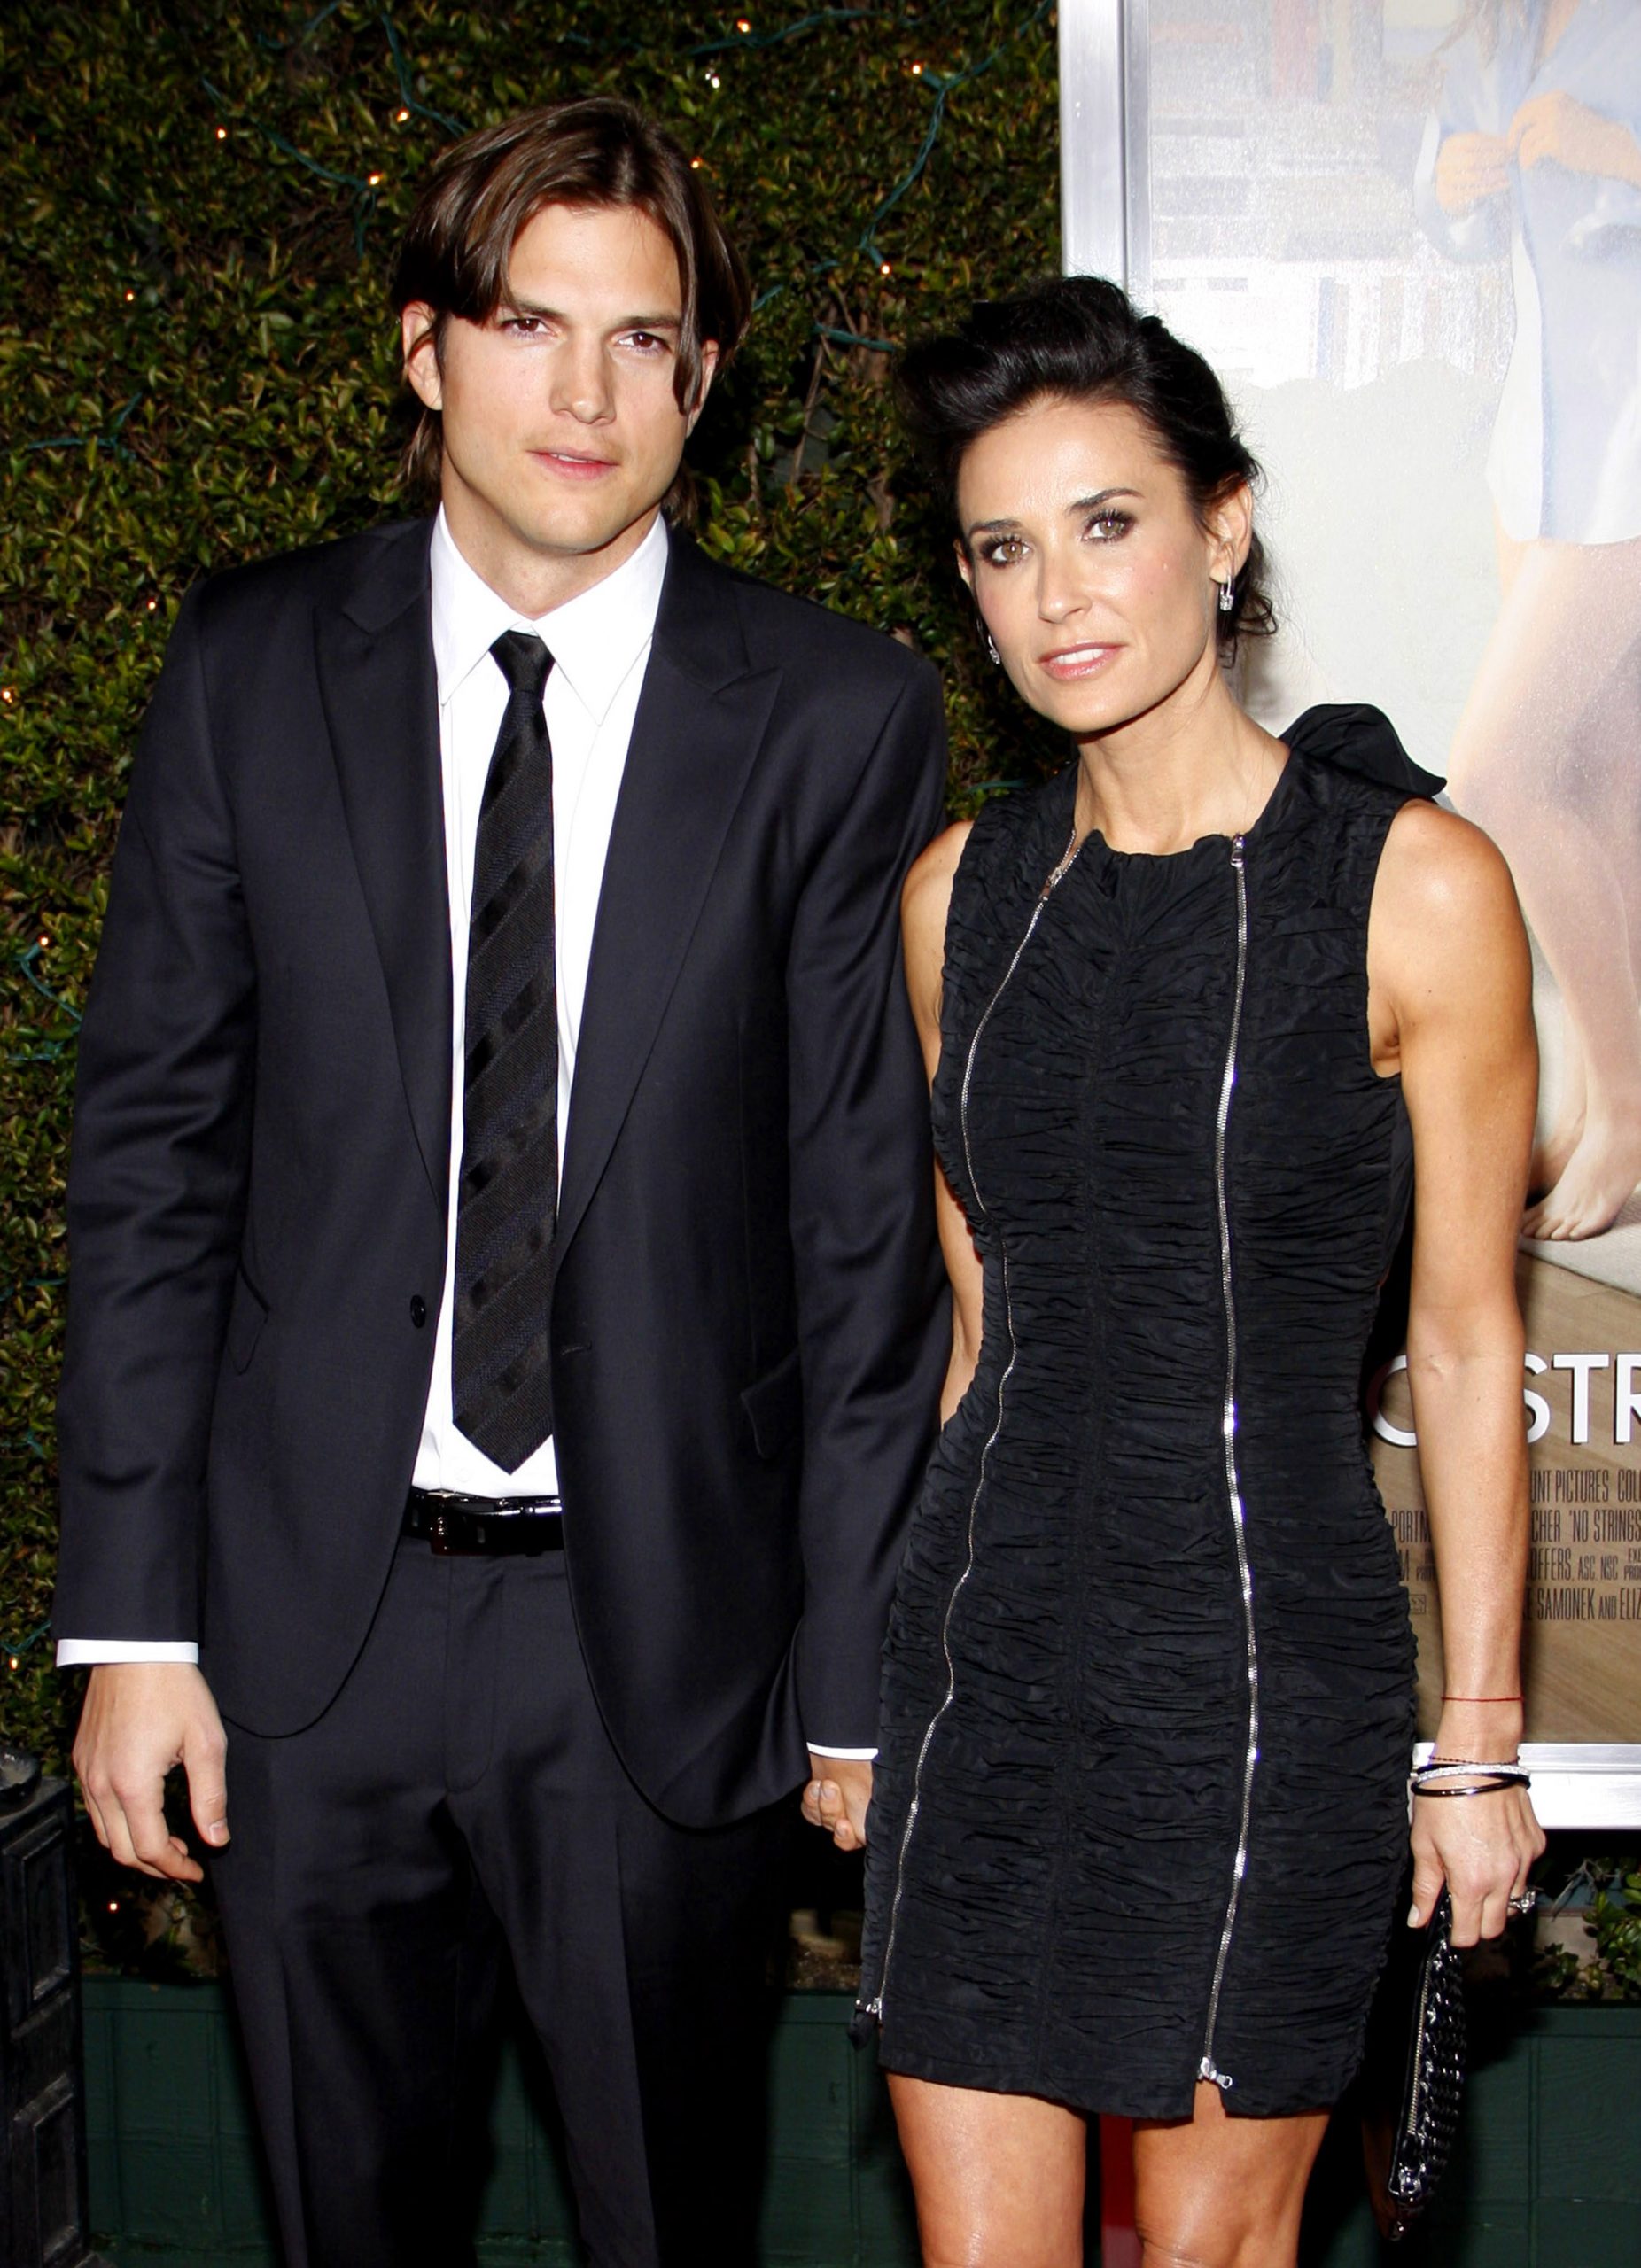 Ashton Kutcher and Demi Moore at the Los Angeles Premiere of "No Strings Attached" held at the Regency Village Theatre in Westwood, USA on January 11, 2011. 